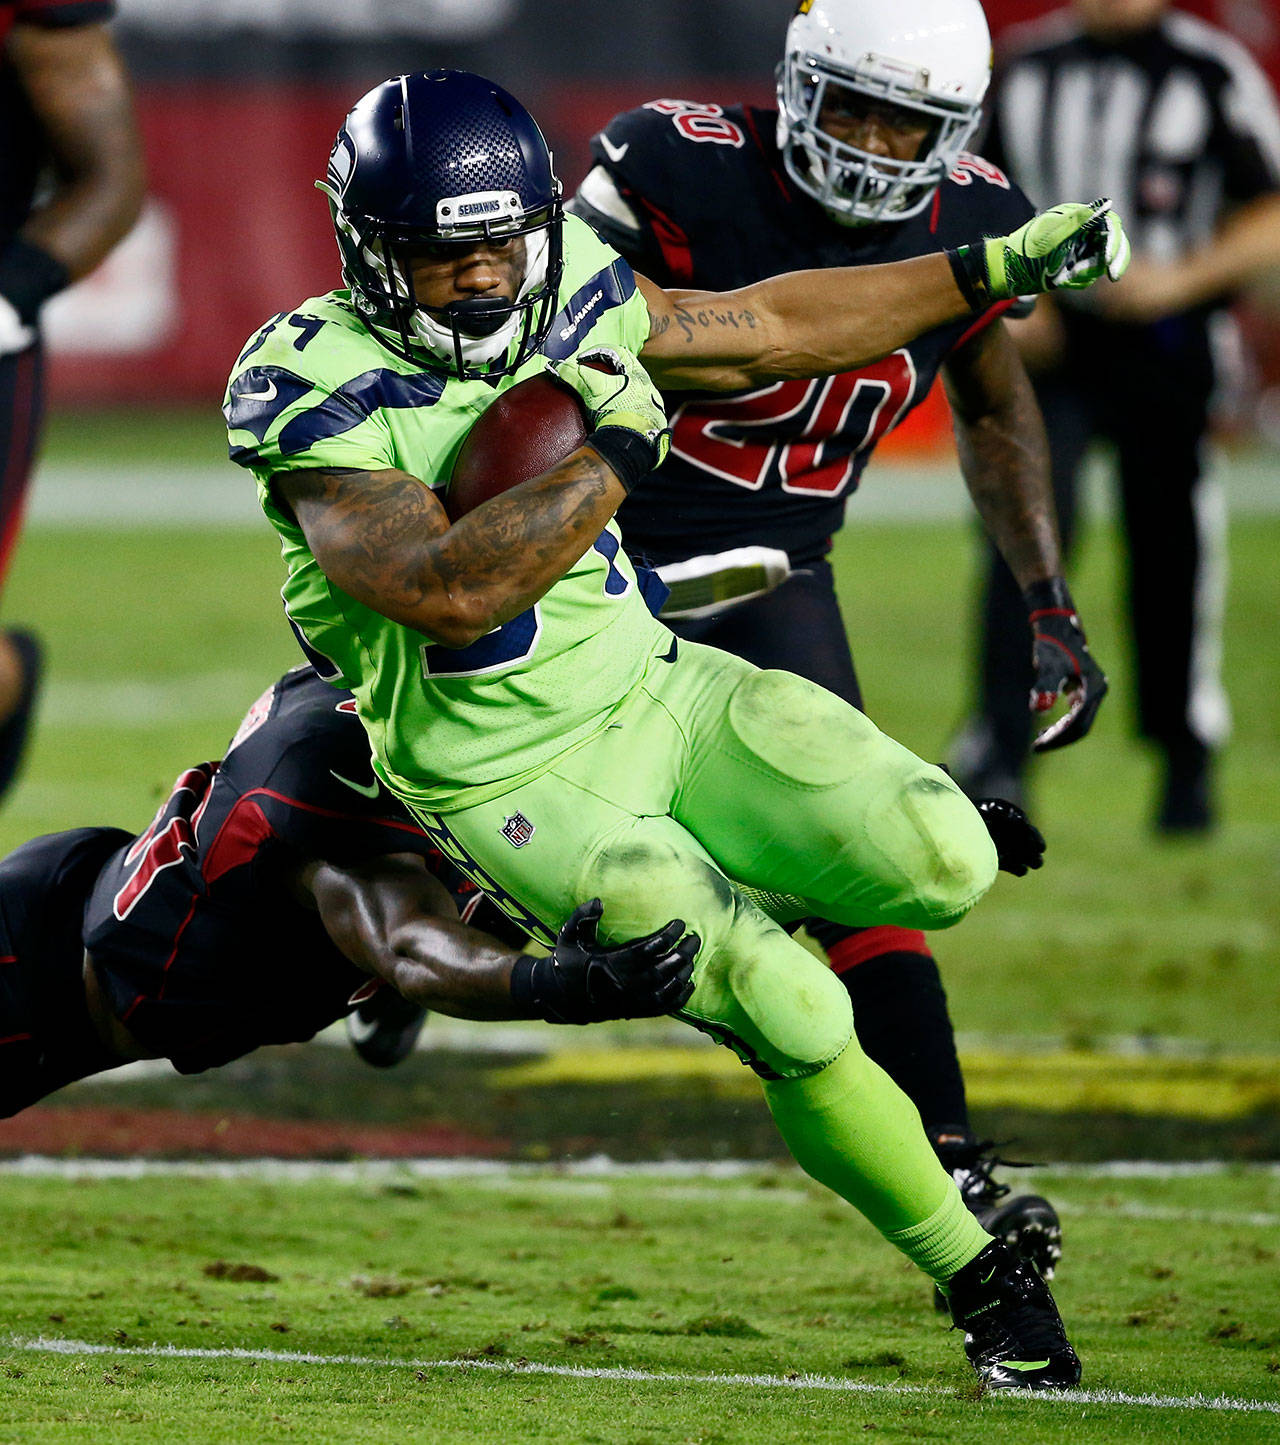 Seahawks running back Thomas Rawls (34) runs the ball against the Cardinals during the first half of a game Nov. 9, 2017, in Glendale, Ariz. (AP Photo/Ross D. Franklin)